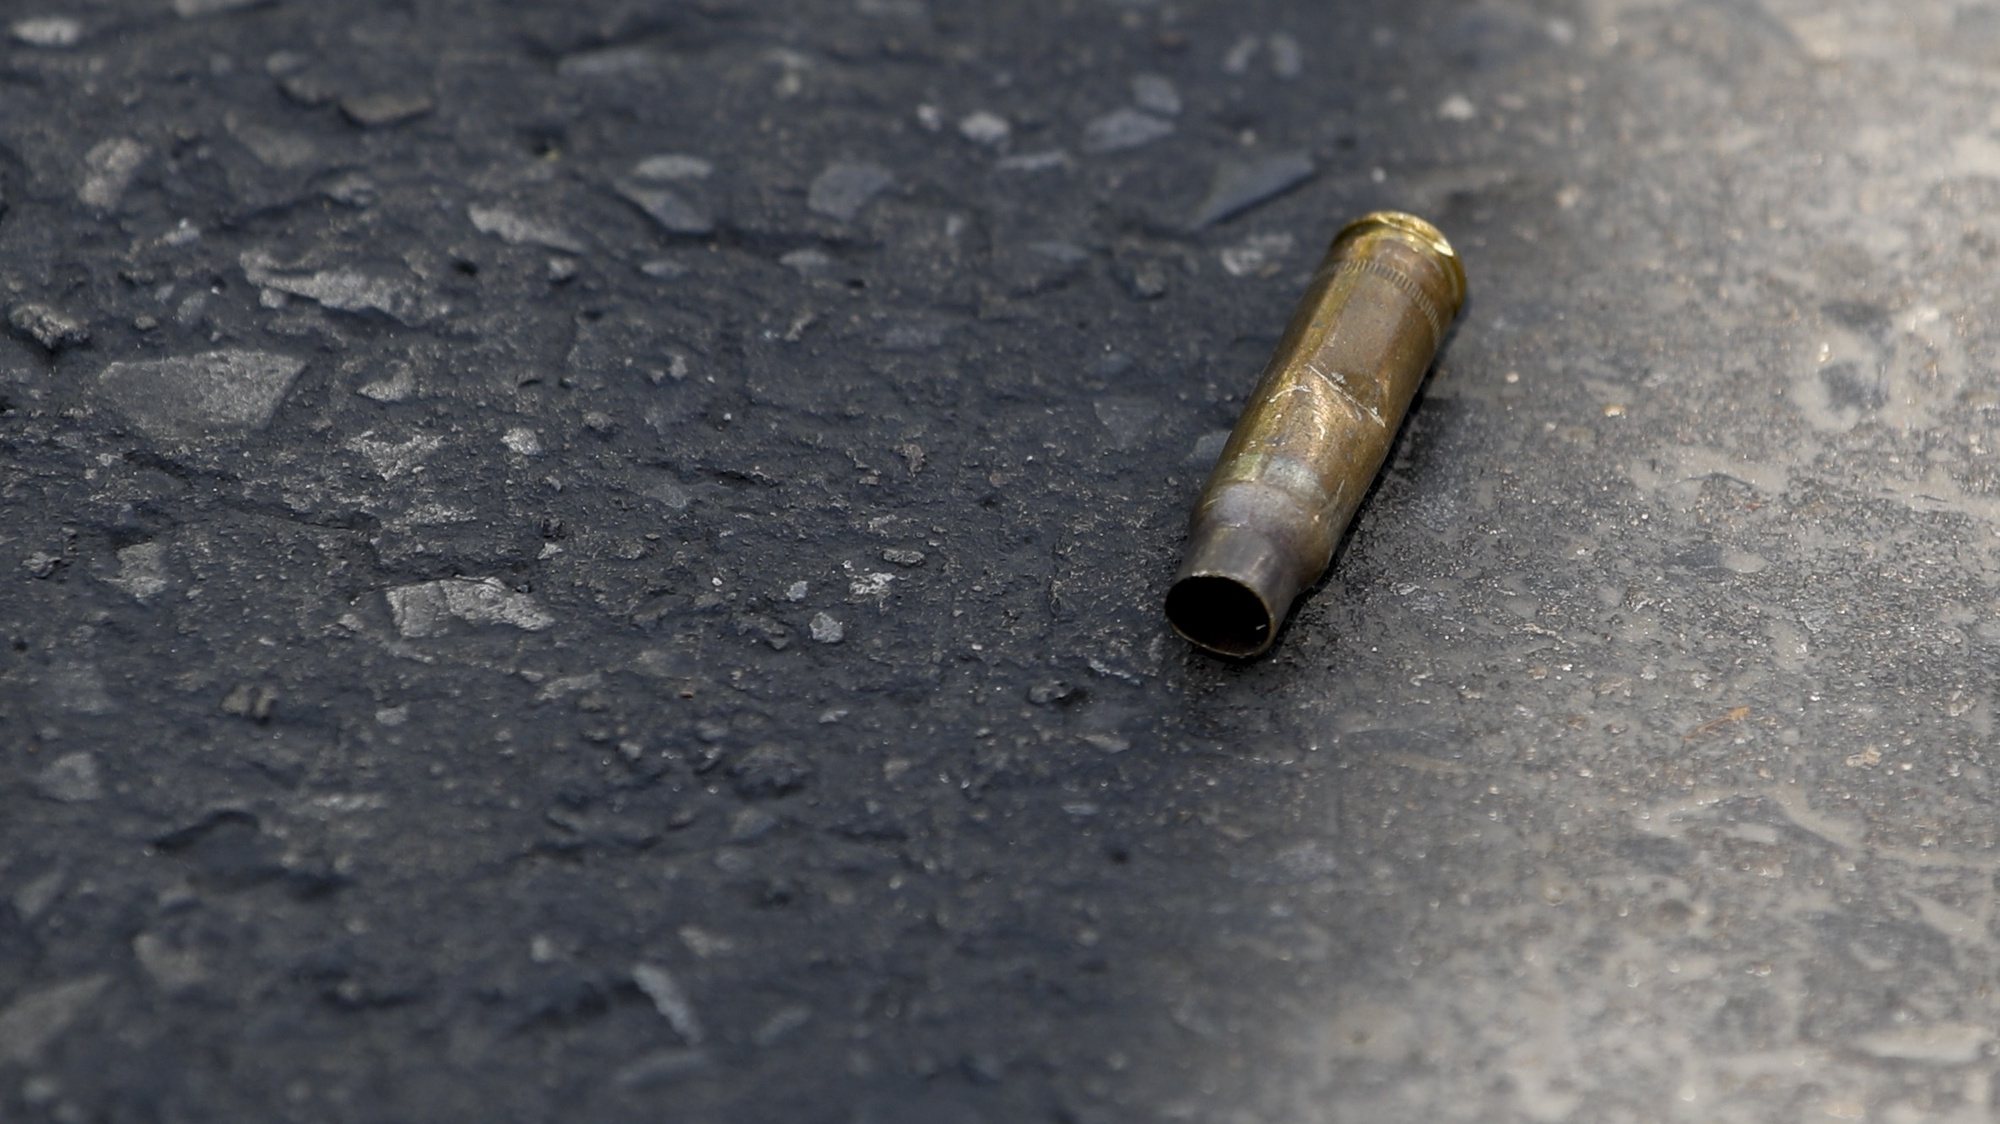 epa08204489 A bullet shell is seen on the street at the scene of a mass shooting at the Terminal 21 shopping mall in Nakhon Ratchasima, Thailand, 09 February 2020. According to media reports, at least 21 people were killed, and as many as 40 wounded after a Thai soldier, identified as 32-year-old Jakraphanth Thomma, went on a shooting rampage with a M60 machine gun in the city of Nakhon Ratchasima, also known as Korat. Thomma held an unknown number of people hostage within the Terminal 21 shopping mall for around 15 hours before being shot and killed in a police operation.  EPA/RUNGROJ YONGRIT